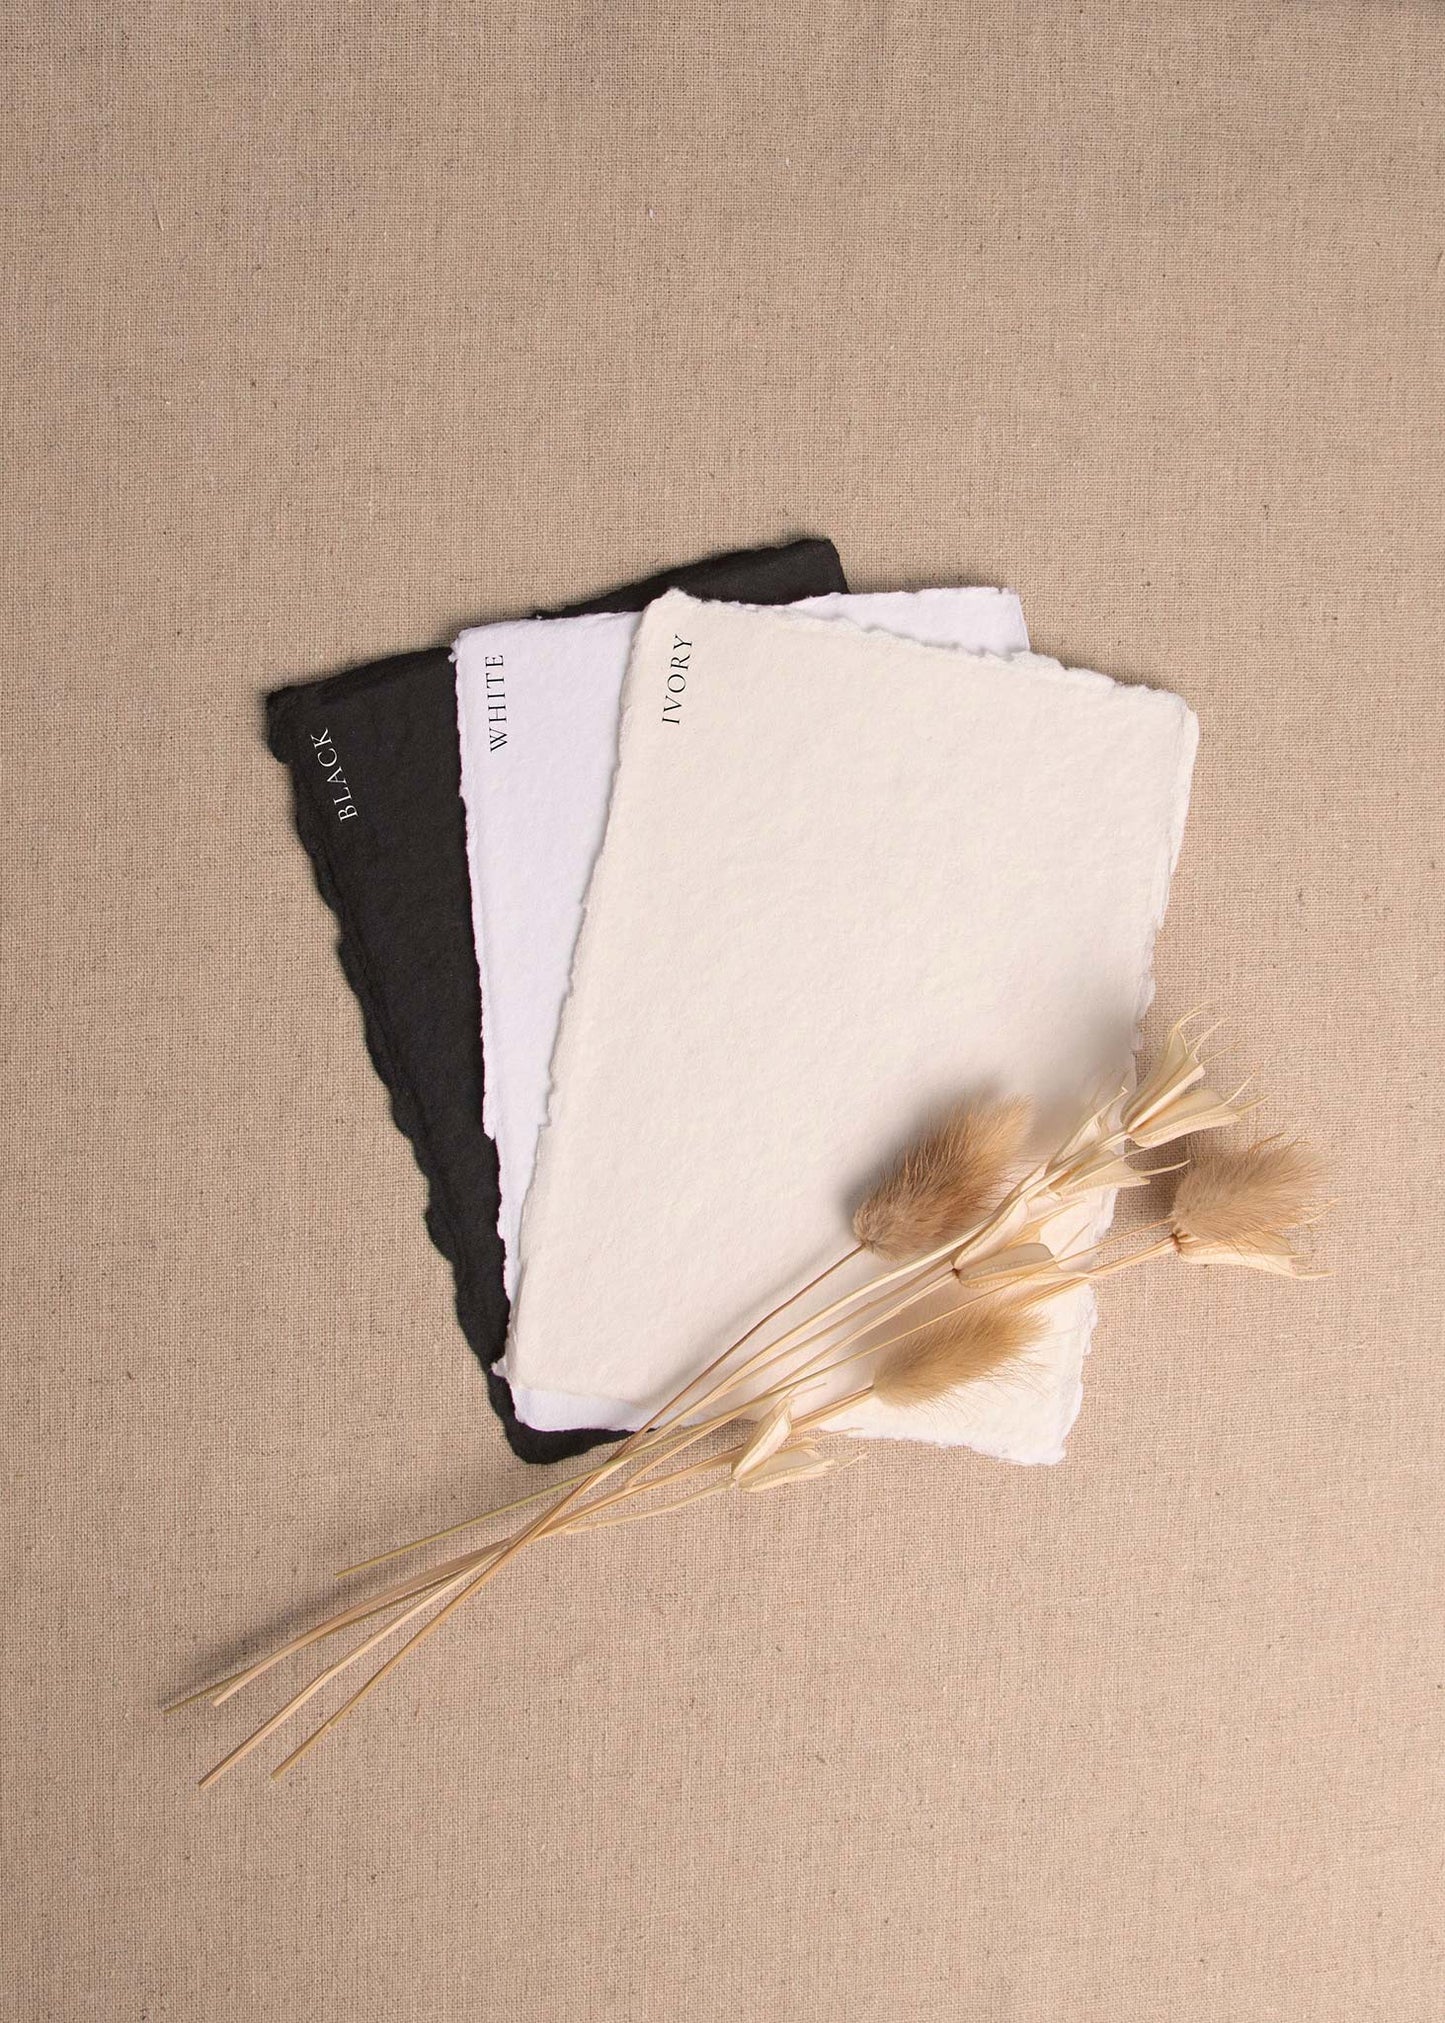  Fanned pile of Black, White, Ivory handmade paper envelopes with deckle edge surrounded by dried flowers